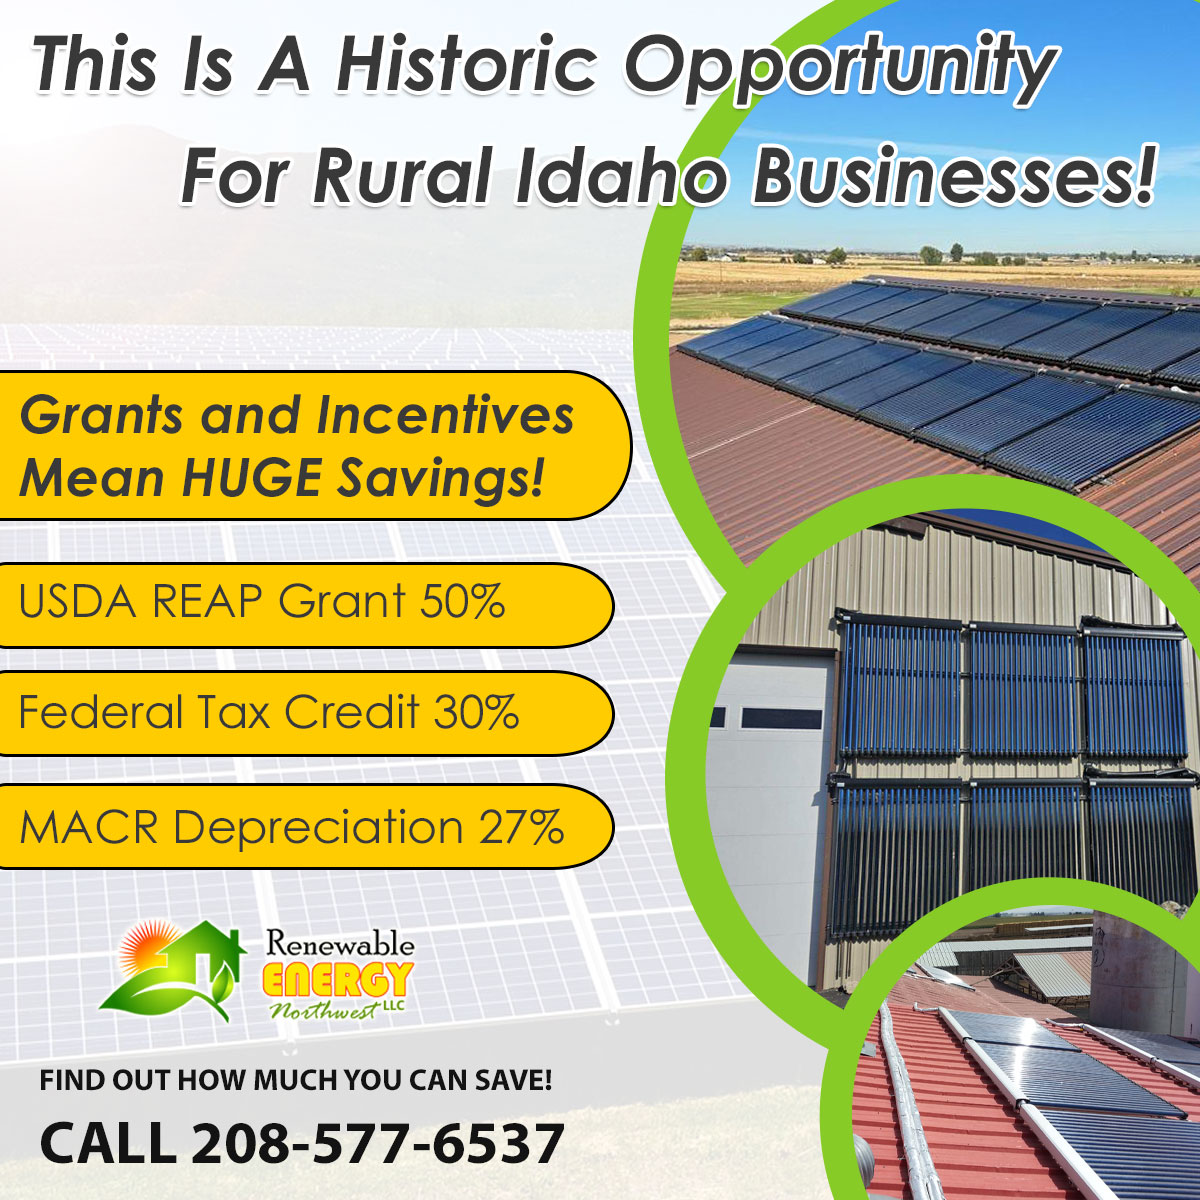 Idaho Rural Businesses Can Save BIG With Solar!